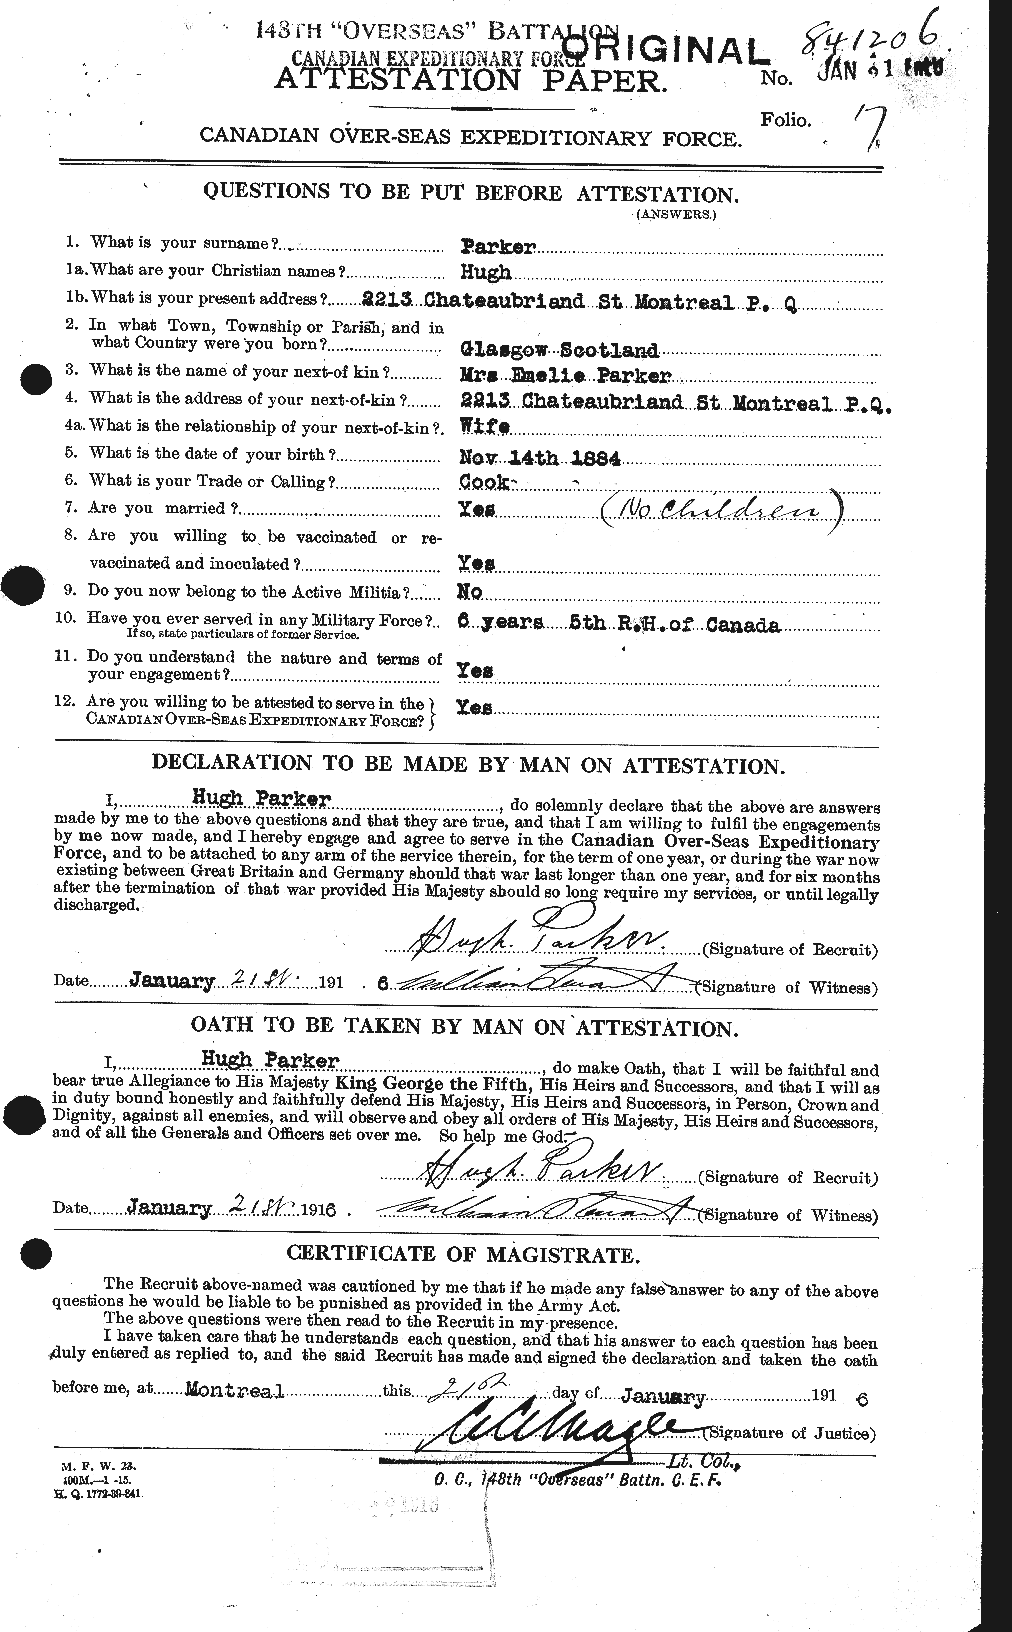 Personnel Records of the First World War - CEF 565392a